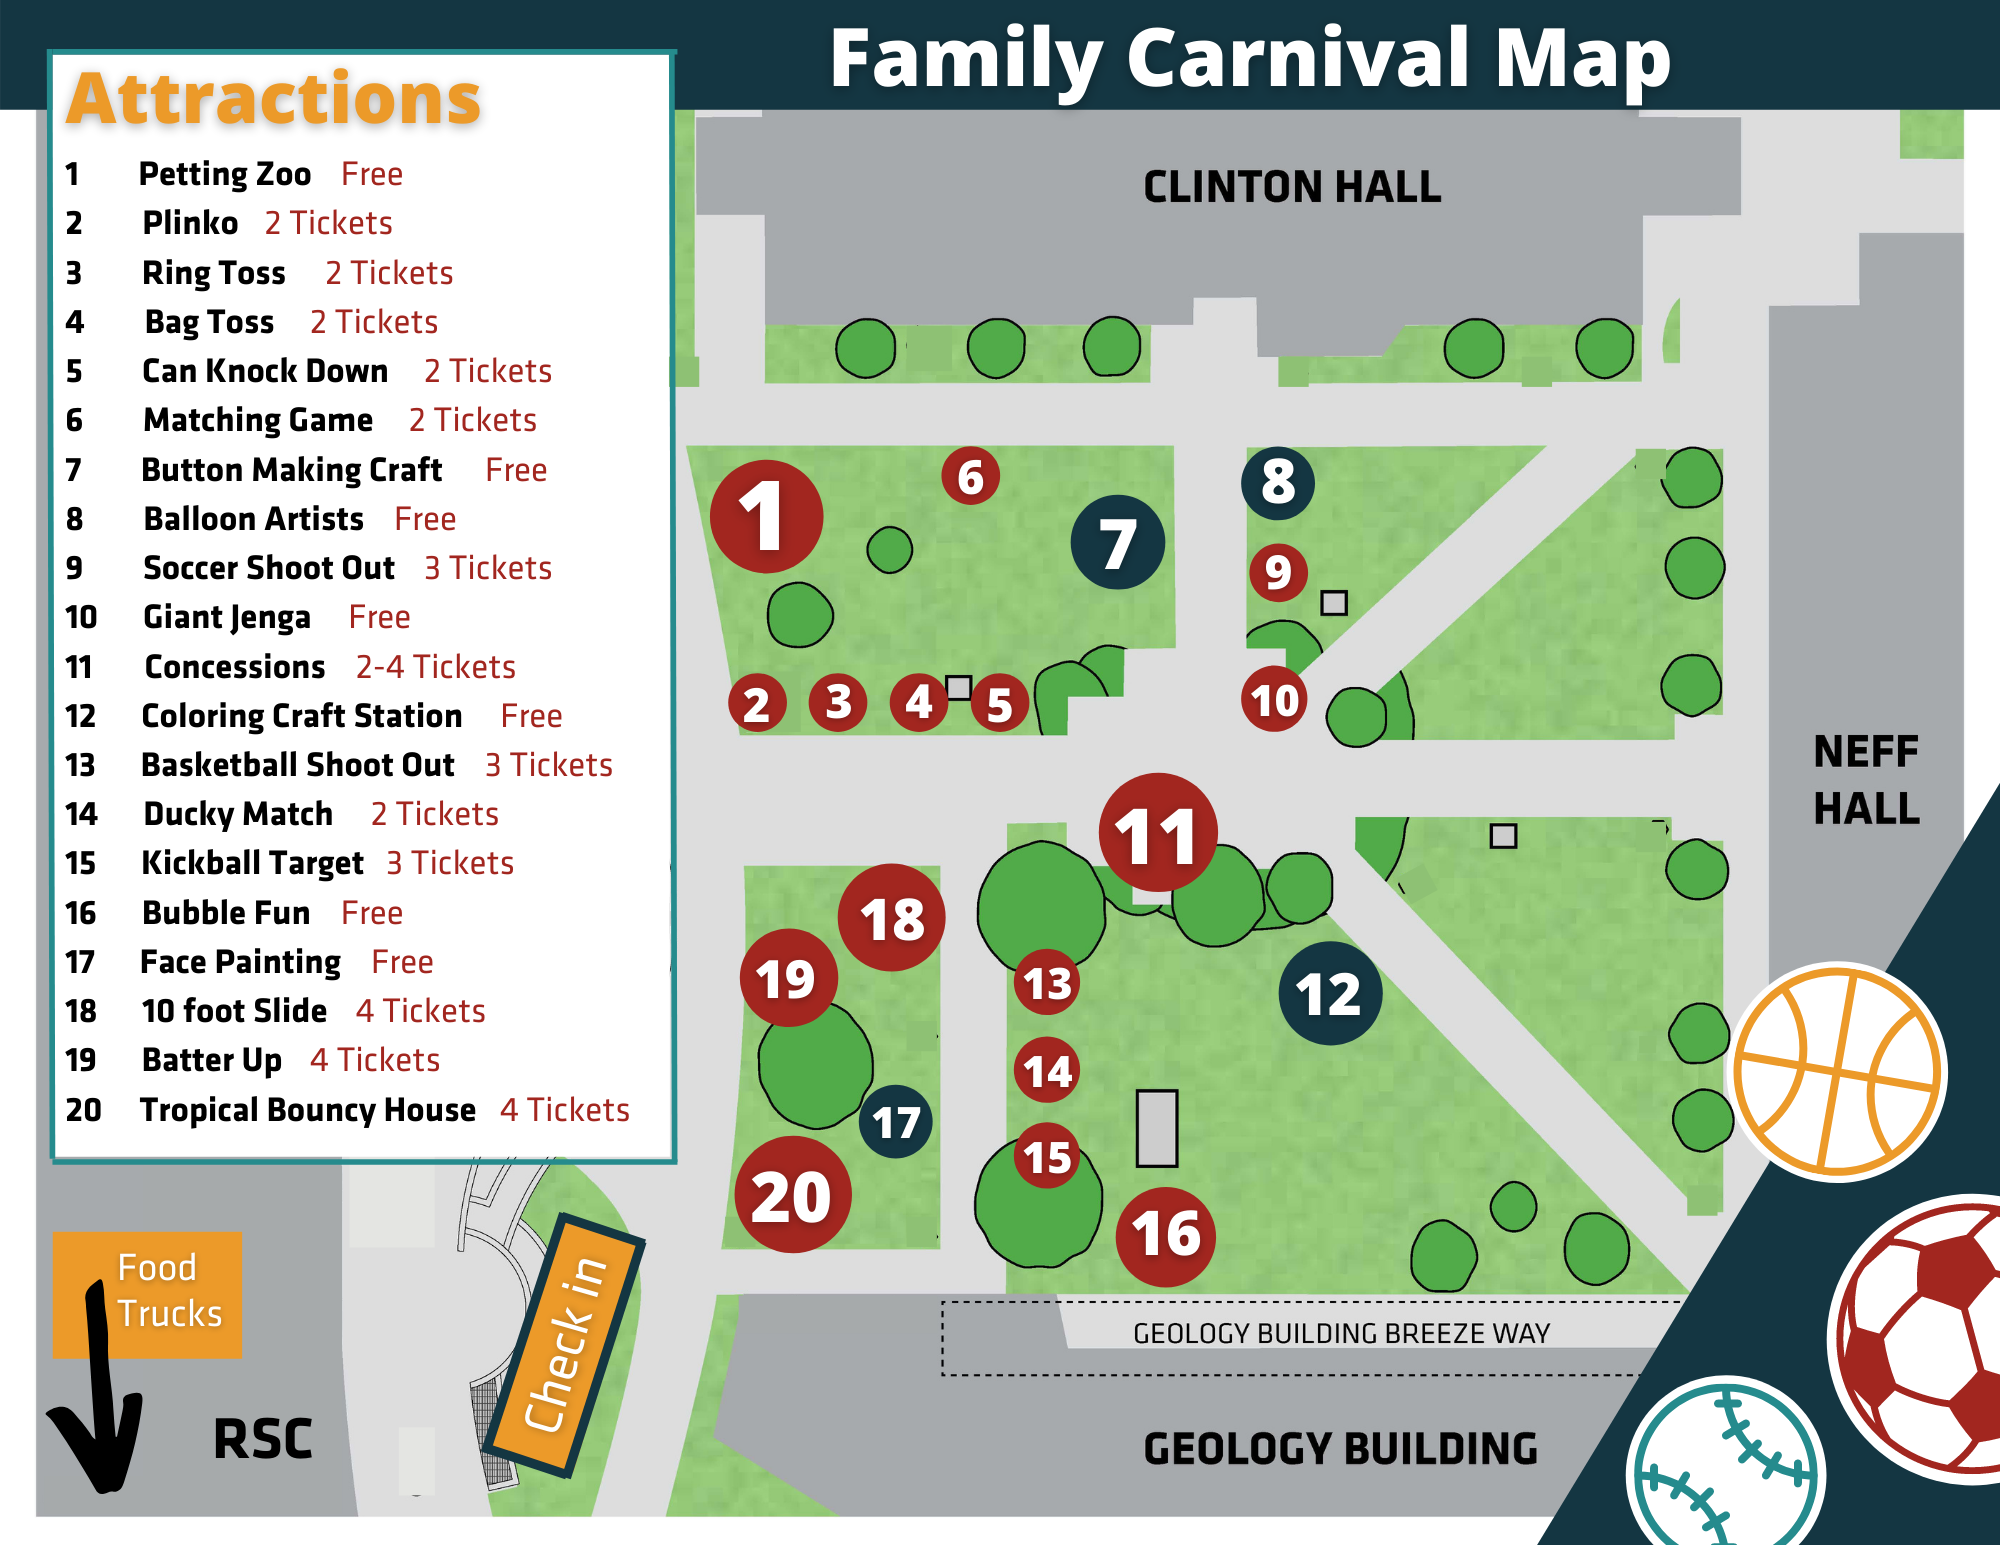 a visual layout of all attractions at family carnival. Total of 20 activities both free and ticketed in the RSC East Courtyard